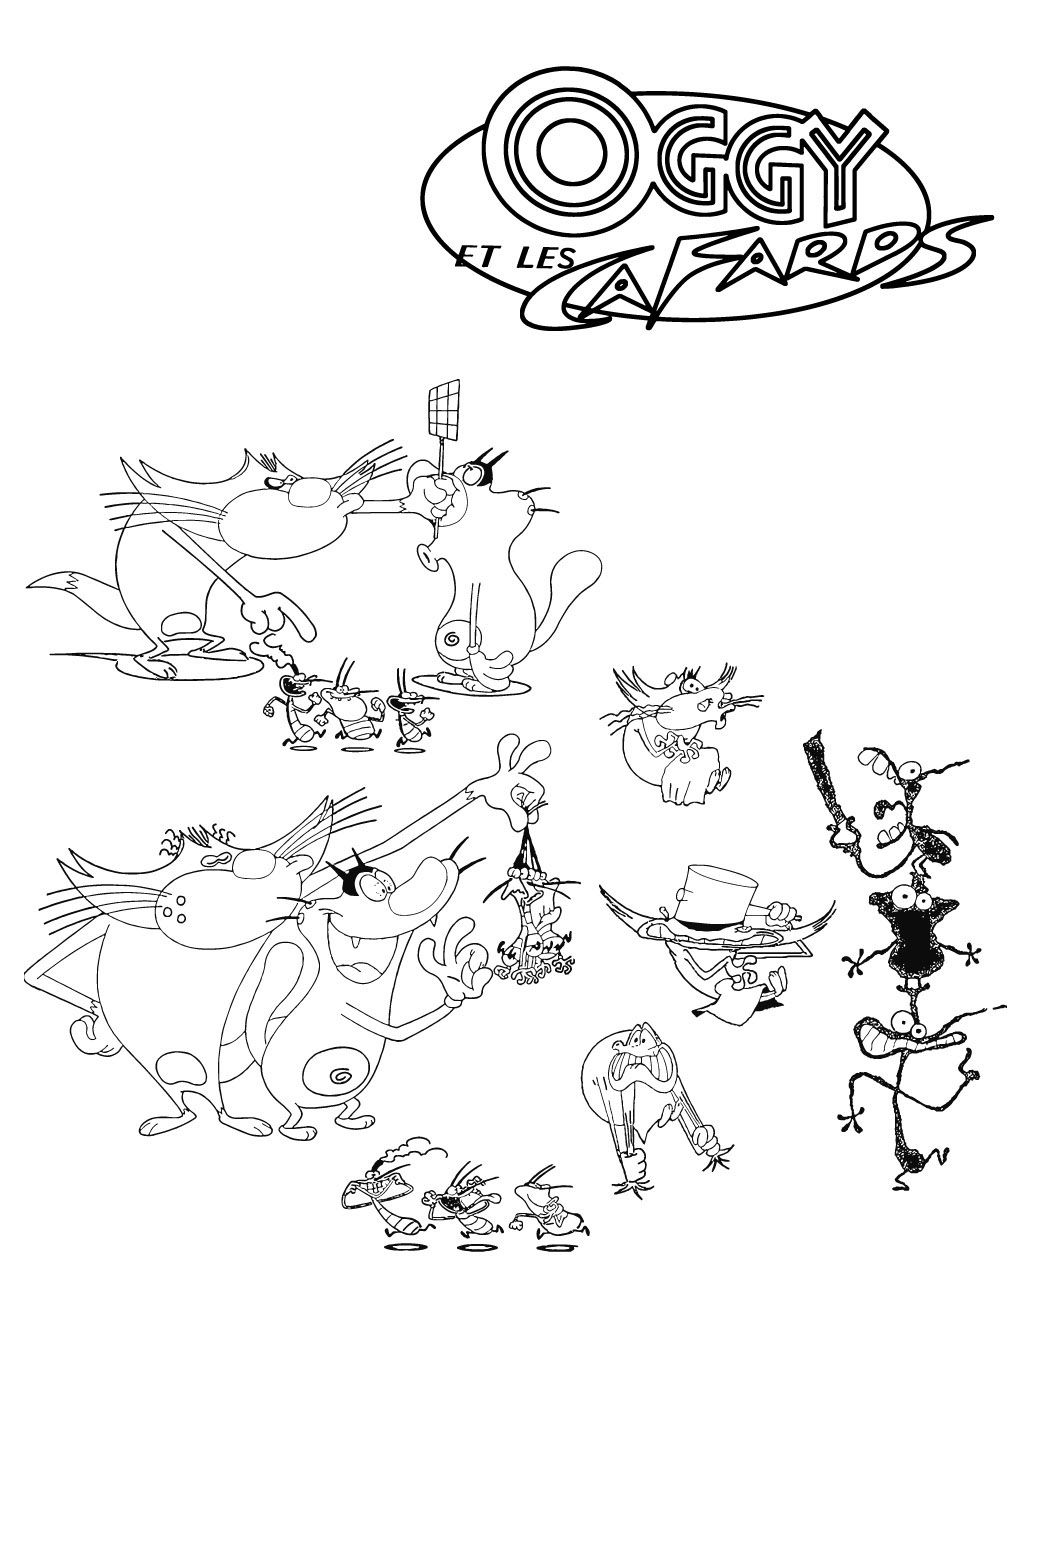 Cool Oggy And The Cockroaches 19 Coloring Page